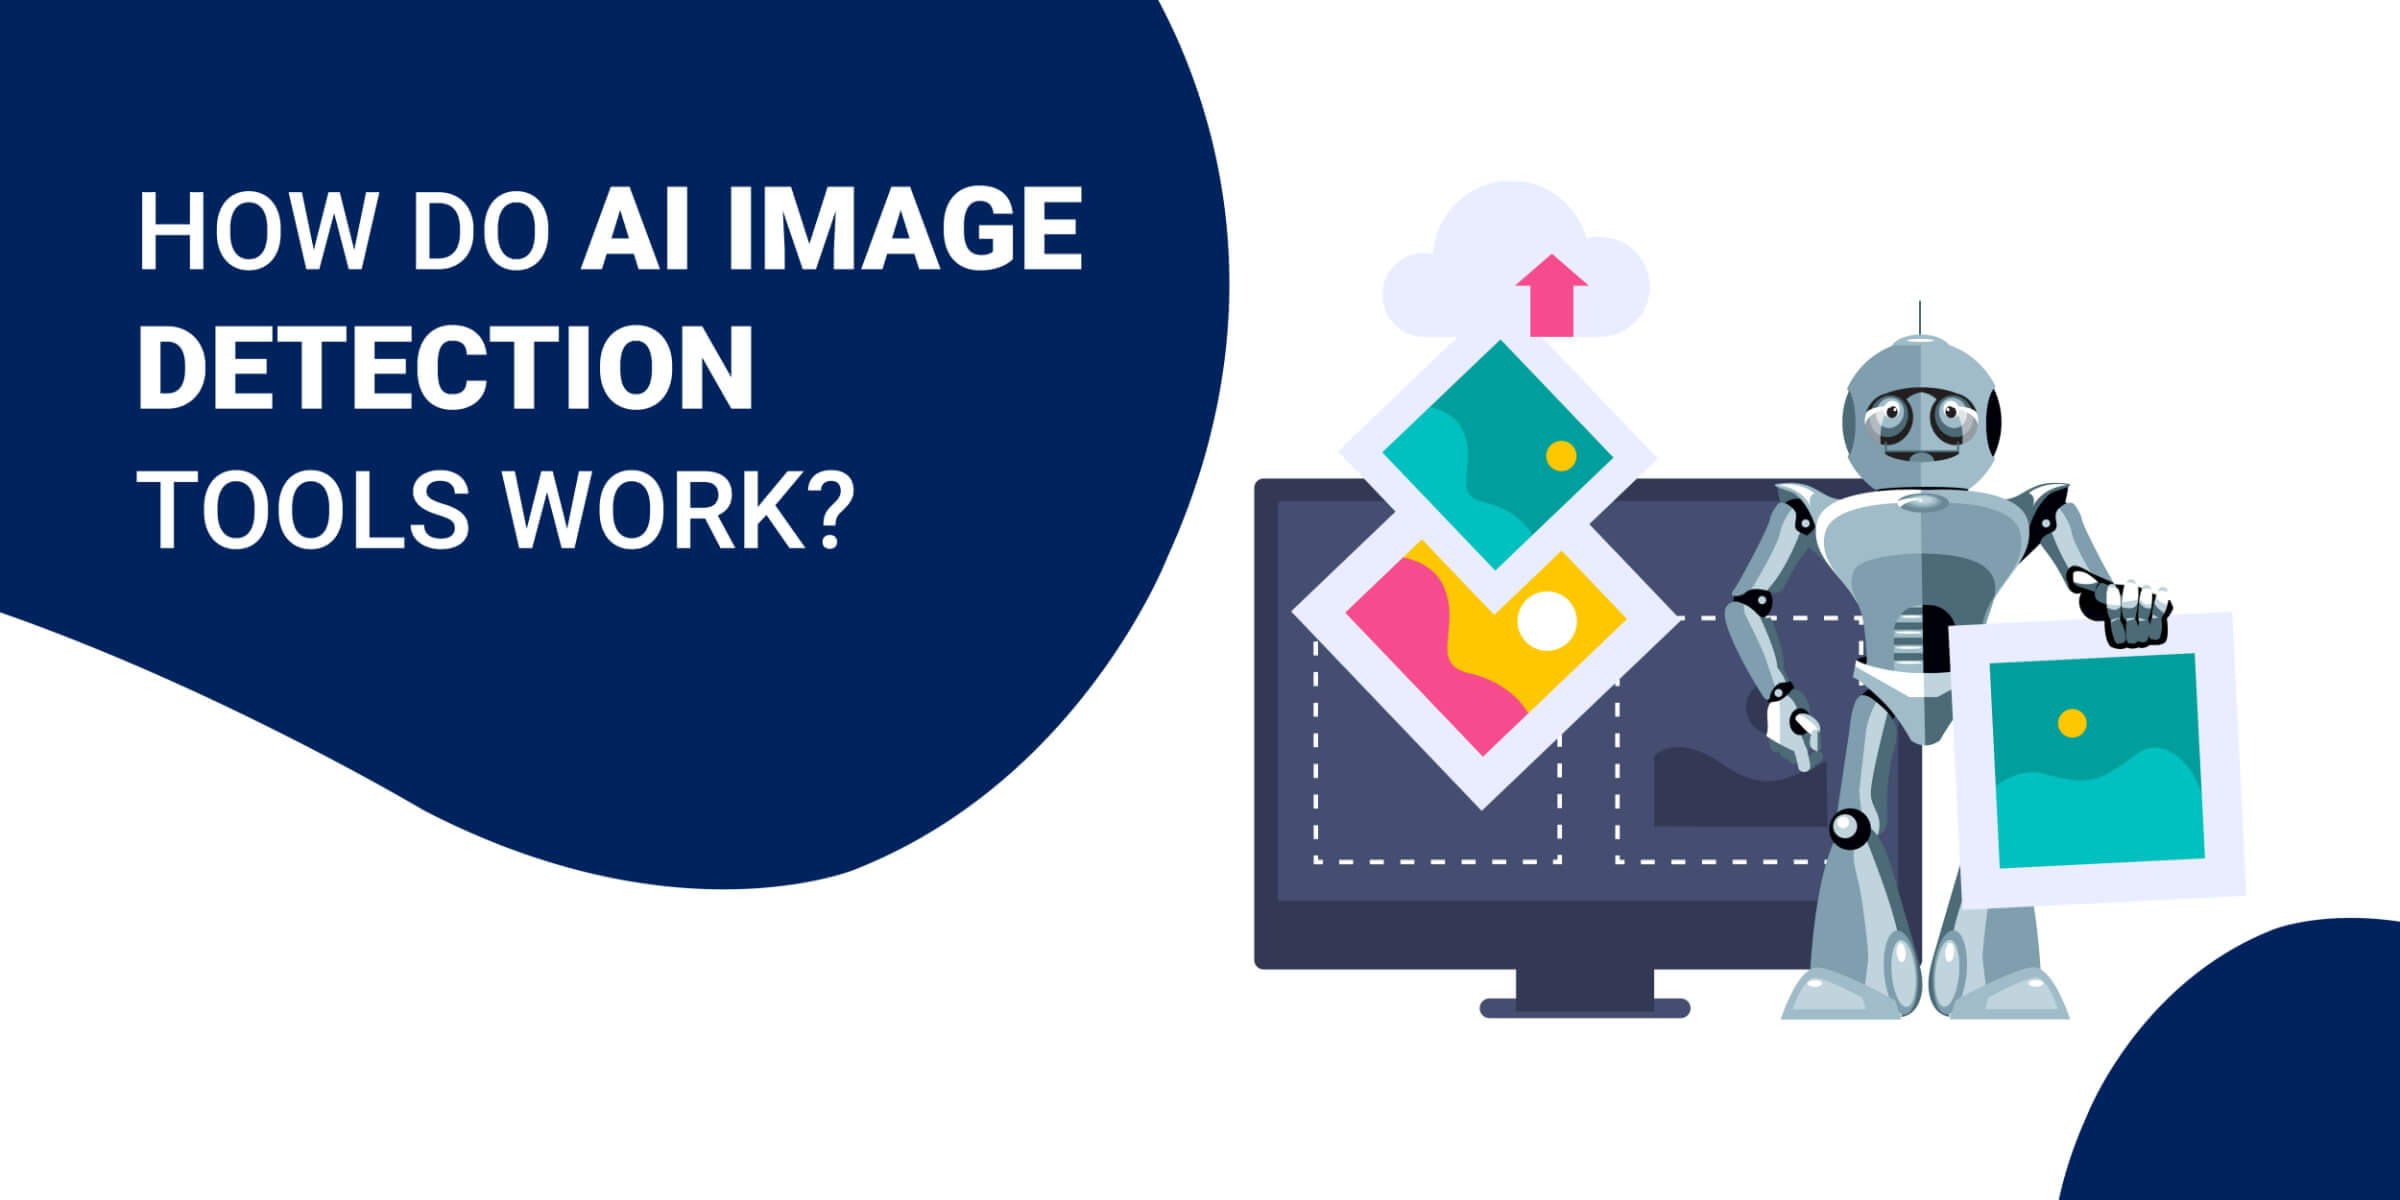 How Do AI Image Detection Tools Work